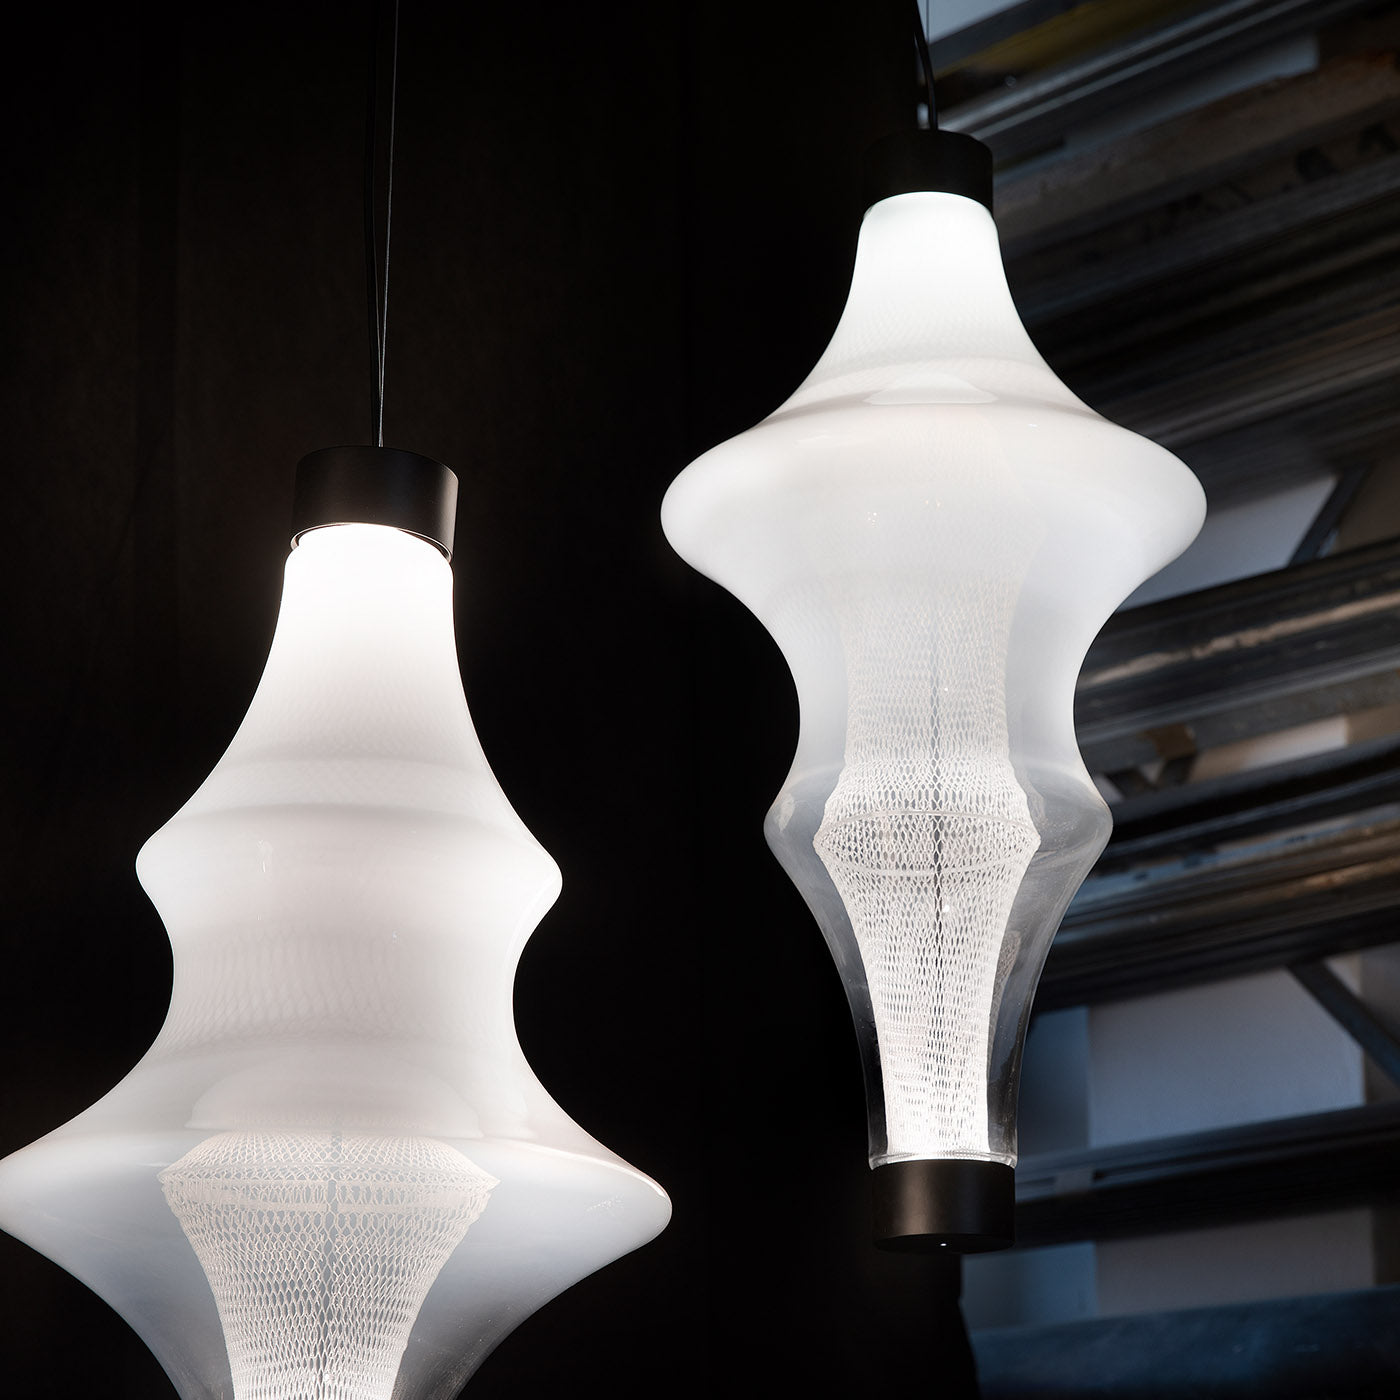 Nasse 01 Pendant Lamp by Marco Zito - Alternative view 2